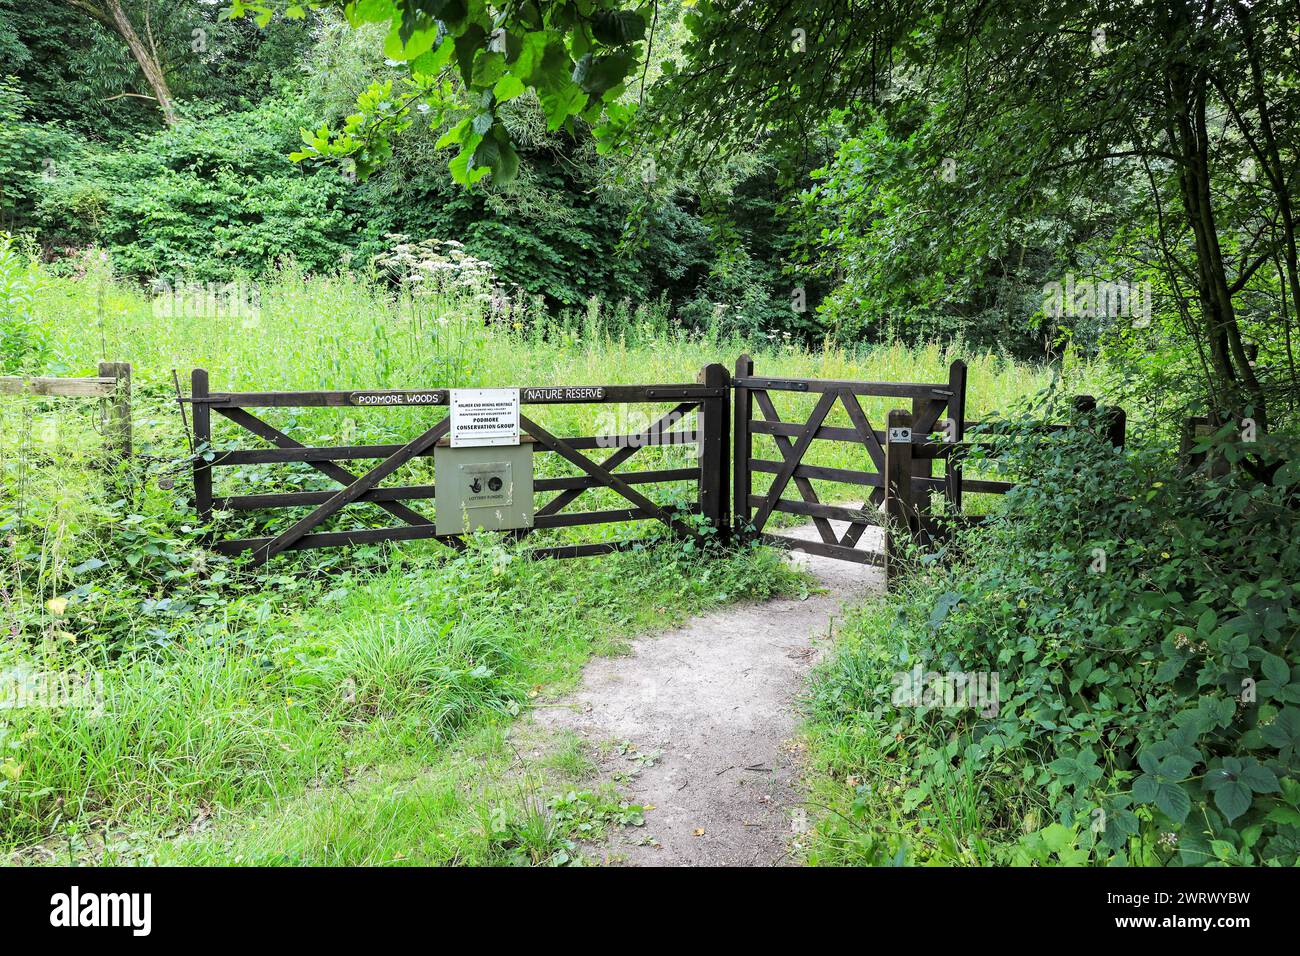 Entrance to Podmore Woods Nature Reserve, Halmer End, Newcastle-under-Lyme, Stoke-on-Trent, Staffordshire, England Stock Photo